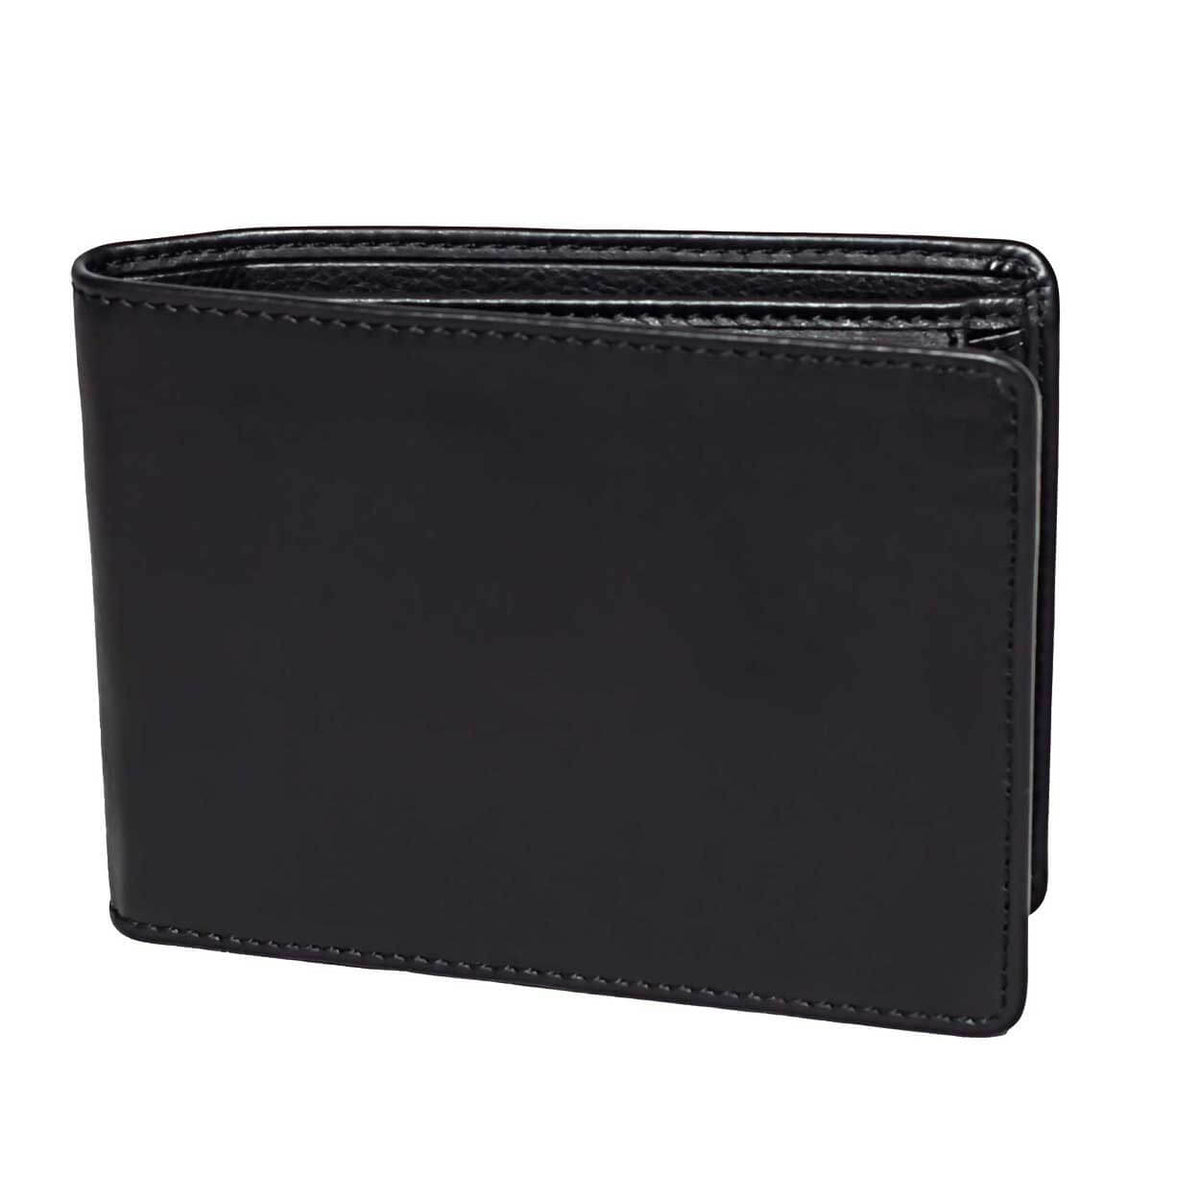 Diloro Men's Leather Wallet Flip ID Coin Section RFID Blocking - DiLoro ...